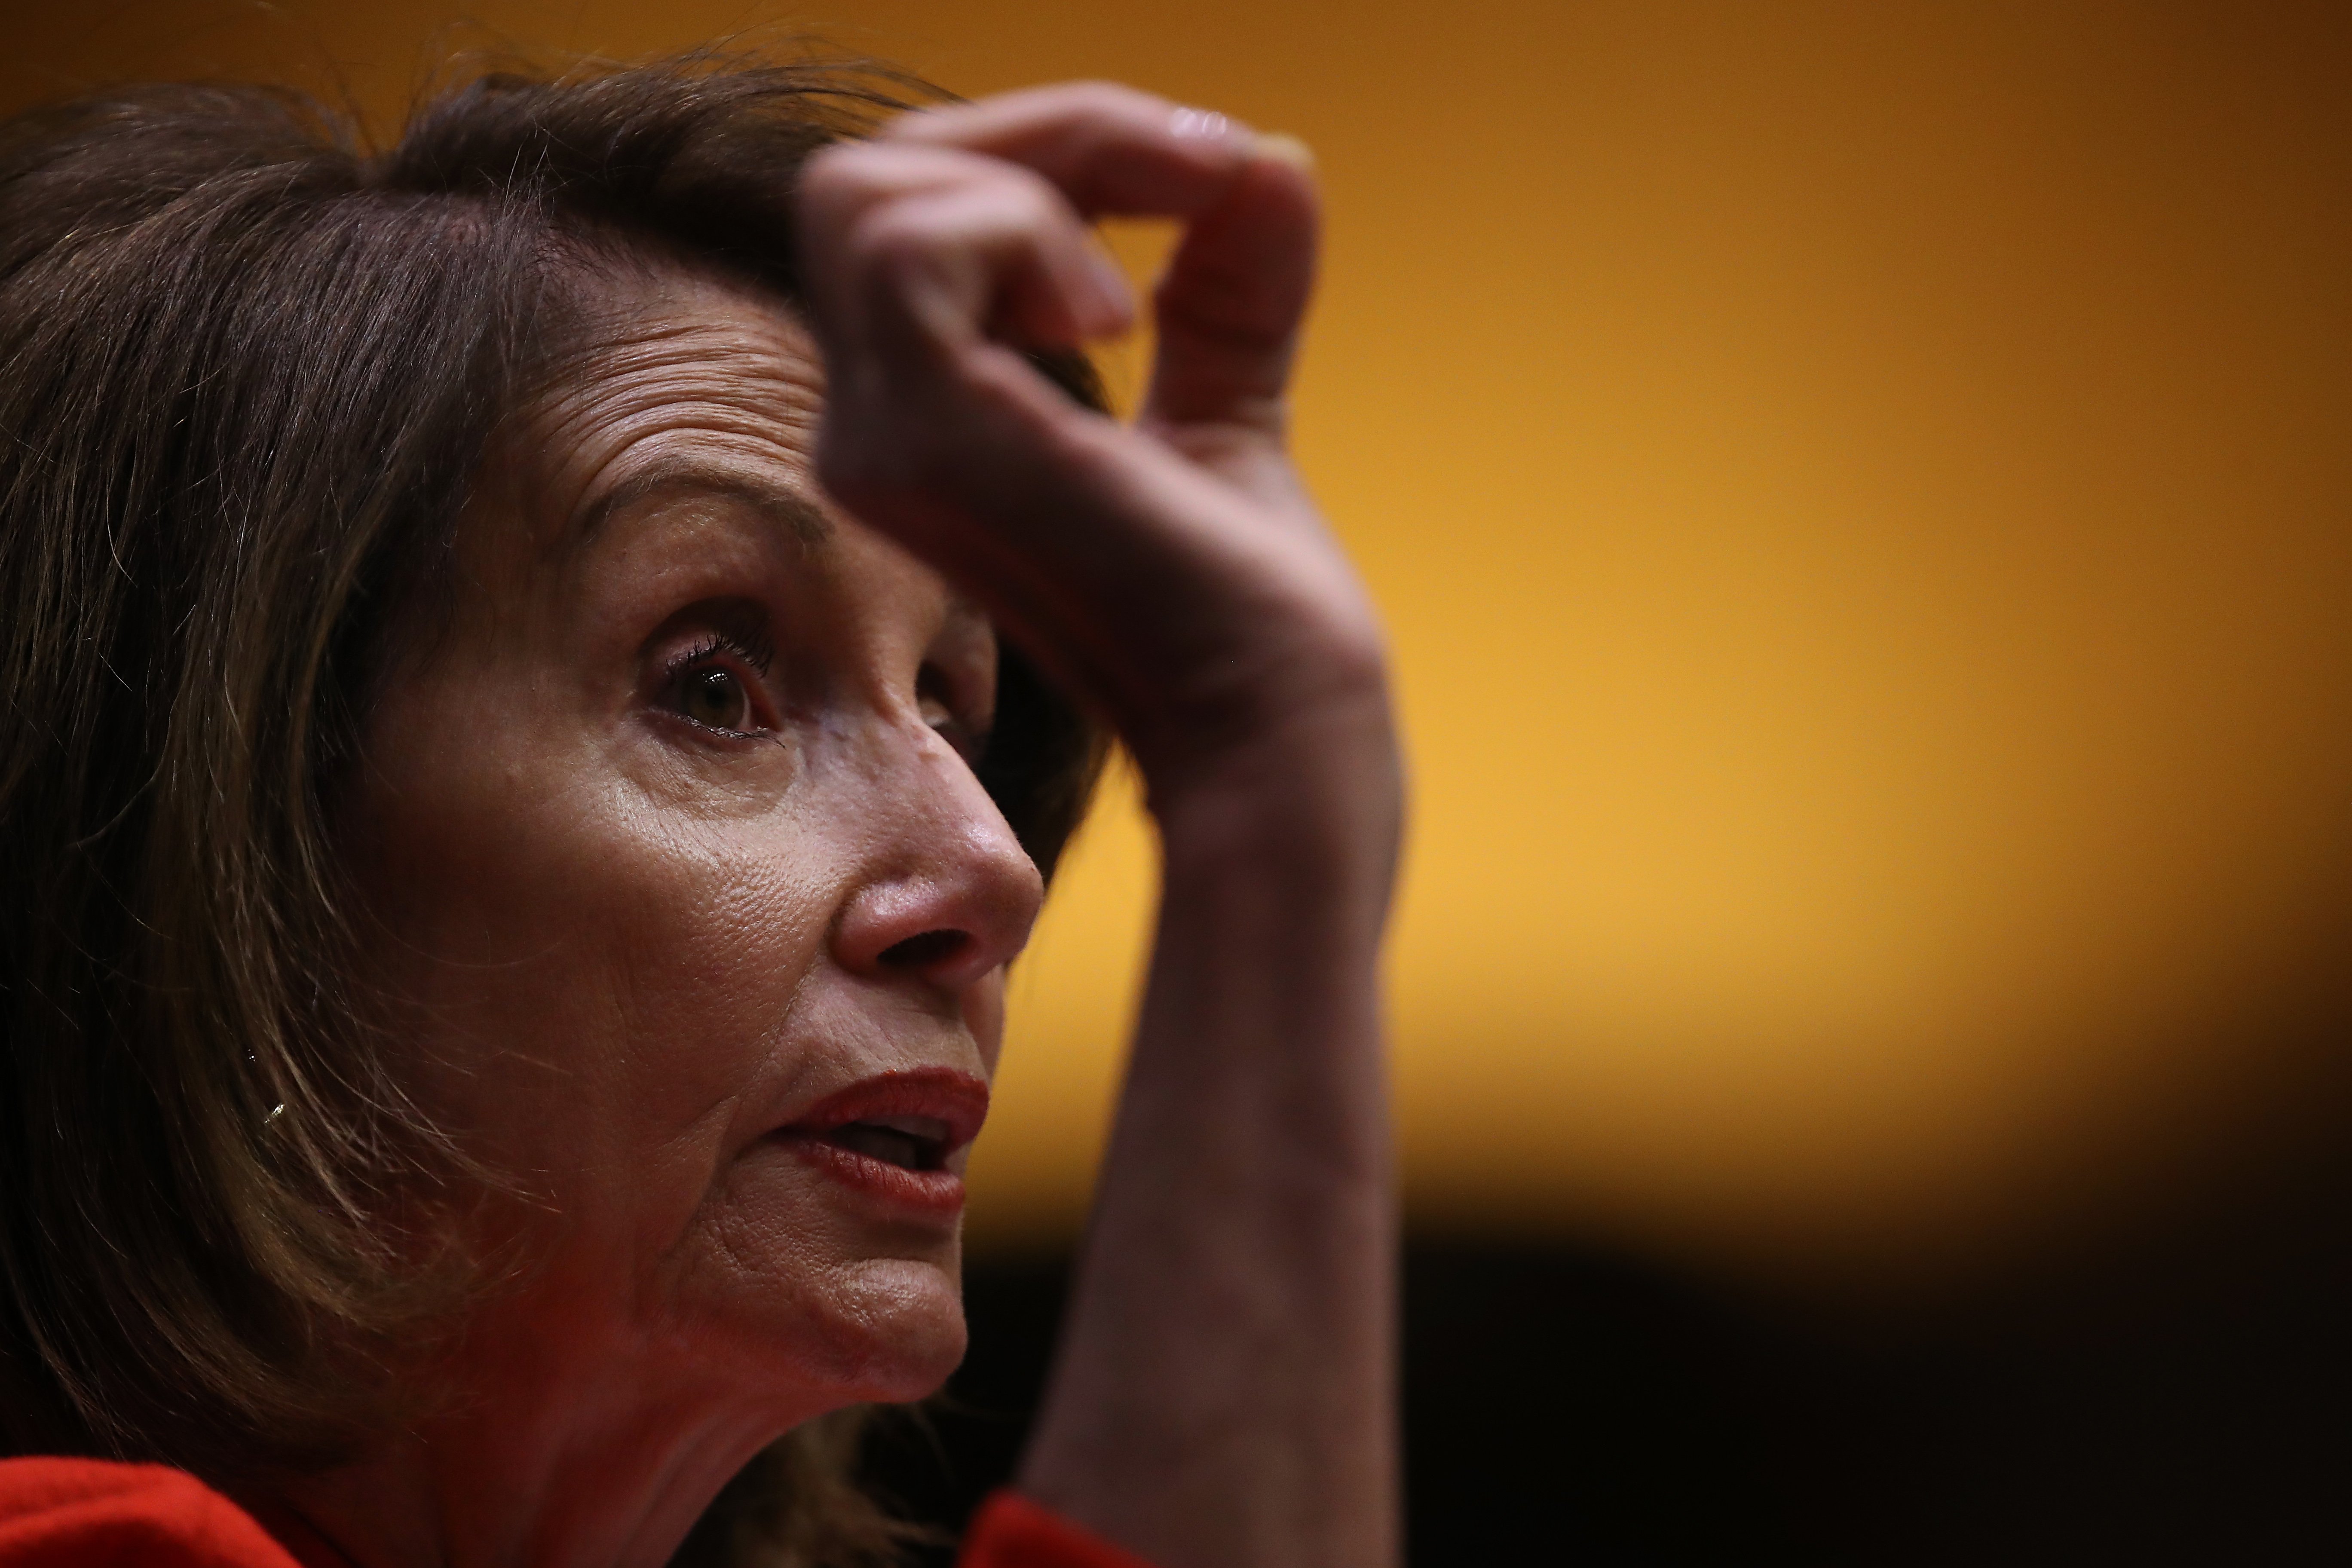 House of Representatives Nancy Pelosi speaking at Capitol Hill | Photo: Getty Images